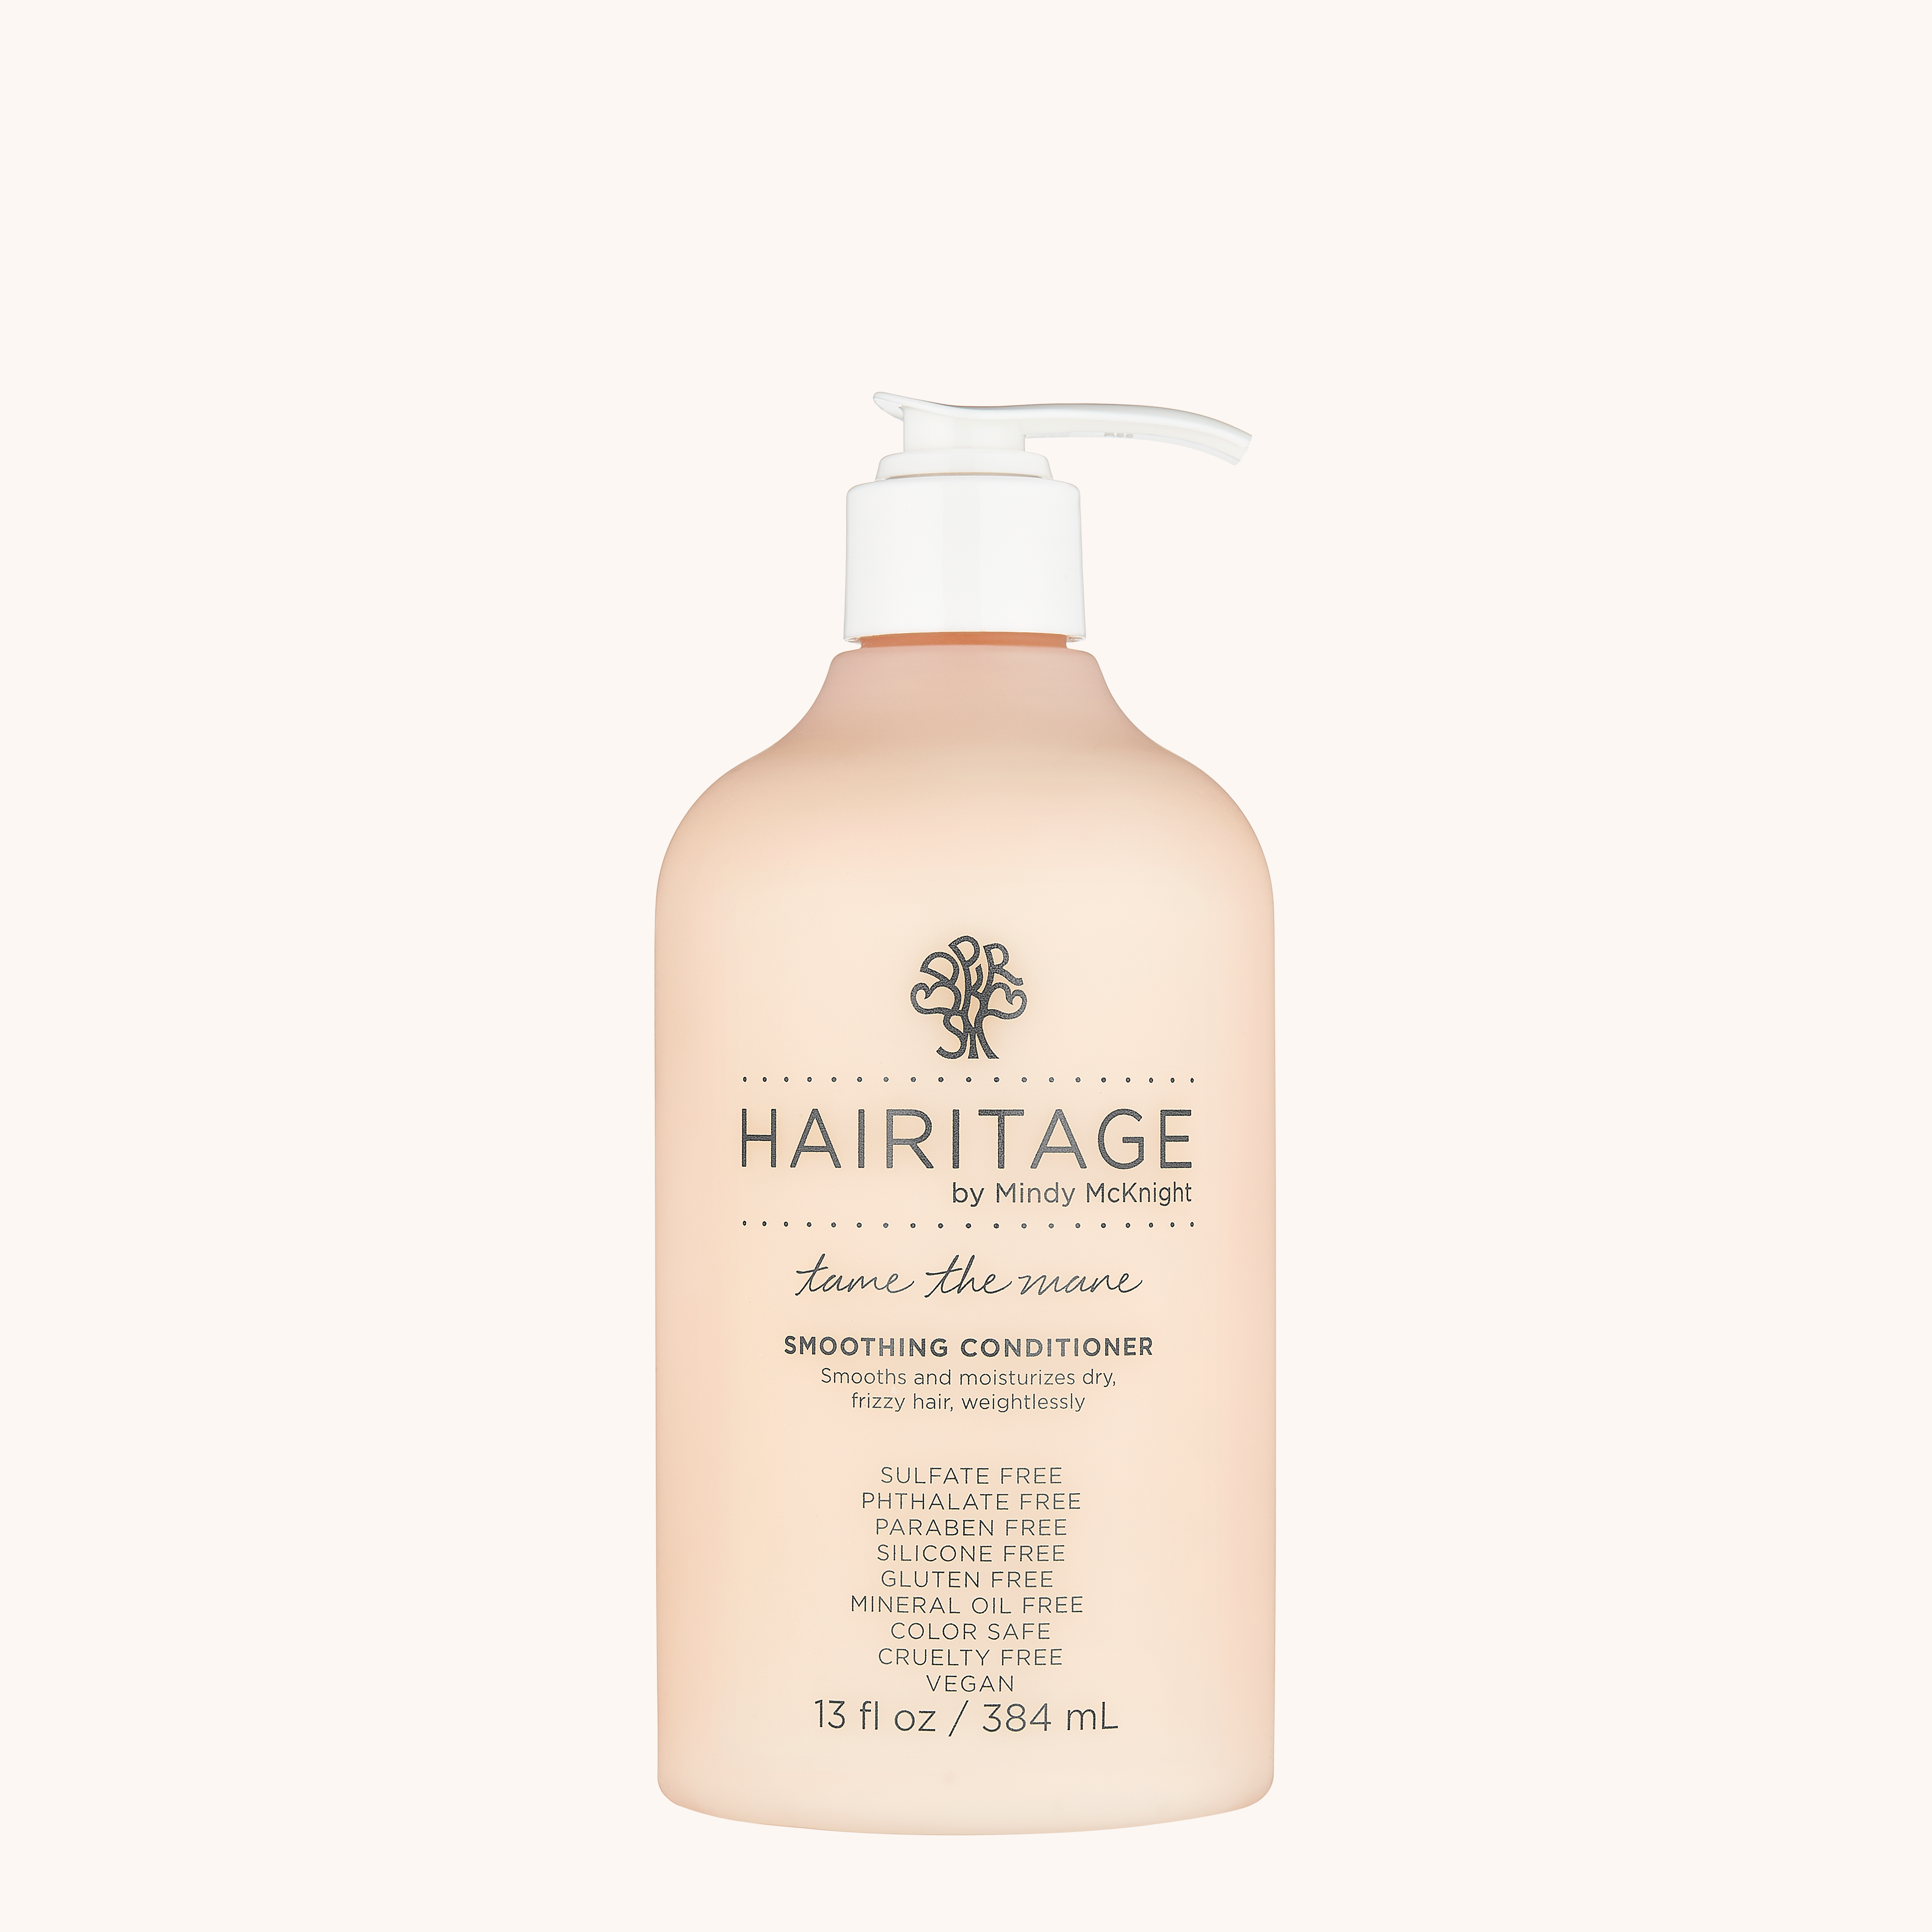 Tame the Mane Smoothing Conditioner